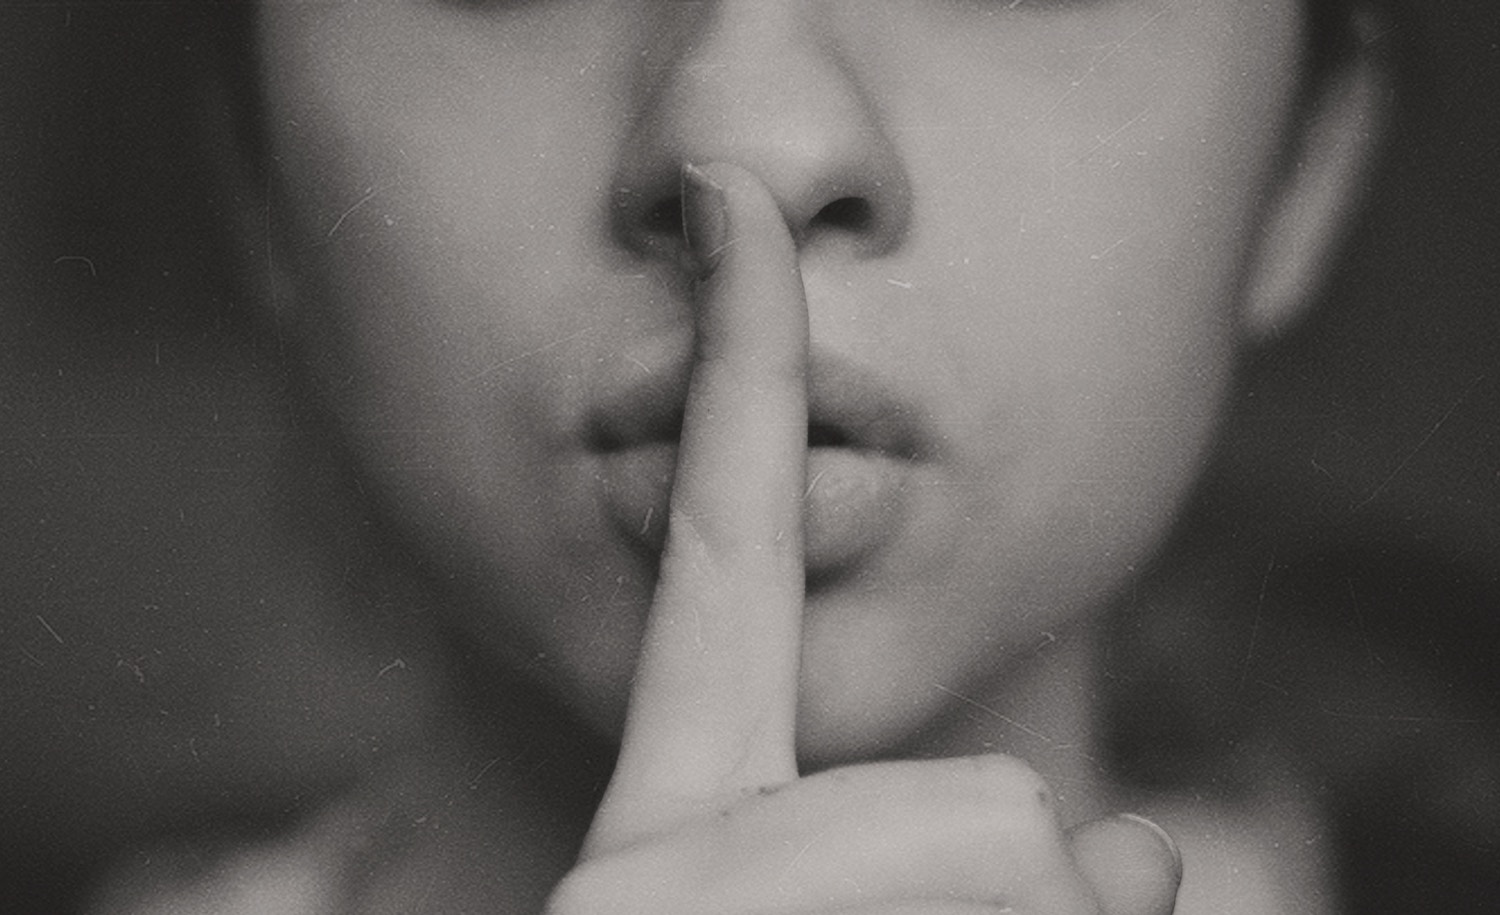 An introvert puts a finger to her mouth to ask someone to be quiet.